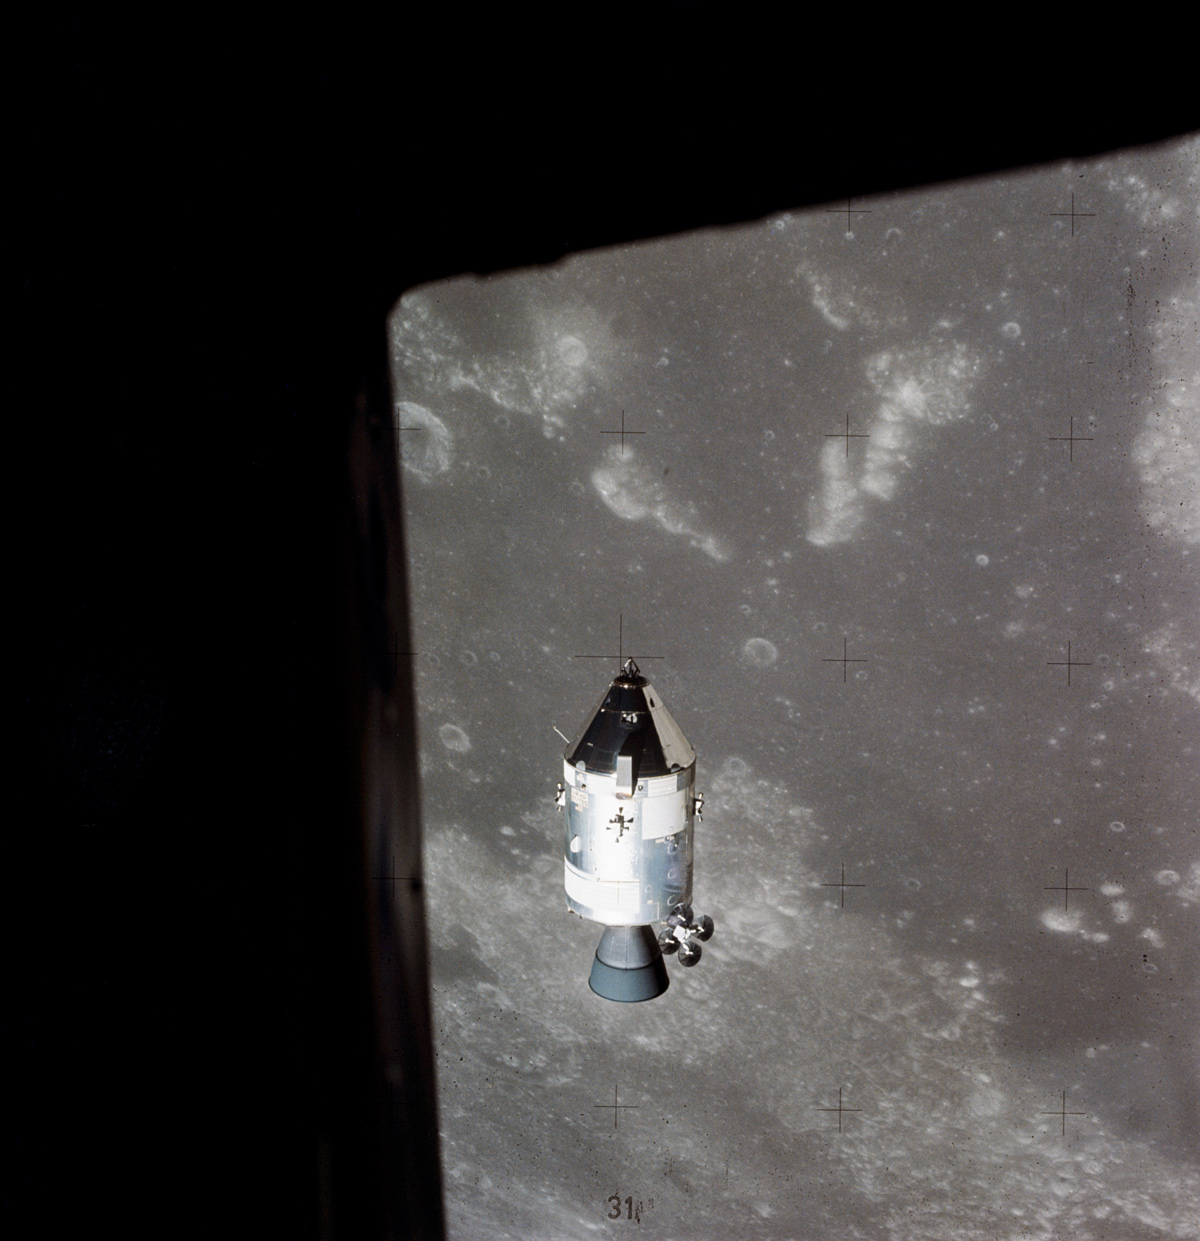 Apollo 15 in lunar orbit, with the surface of the Moon visible in the background. 